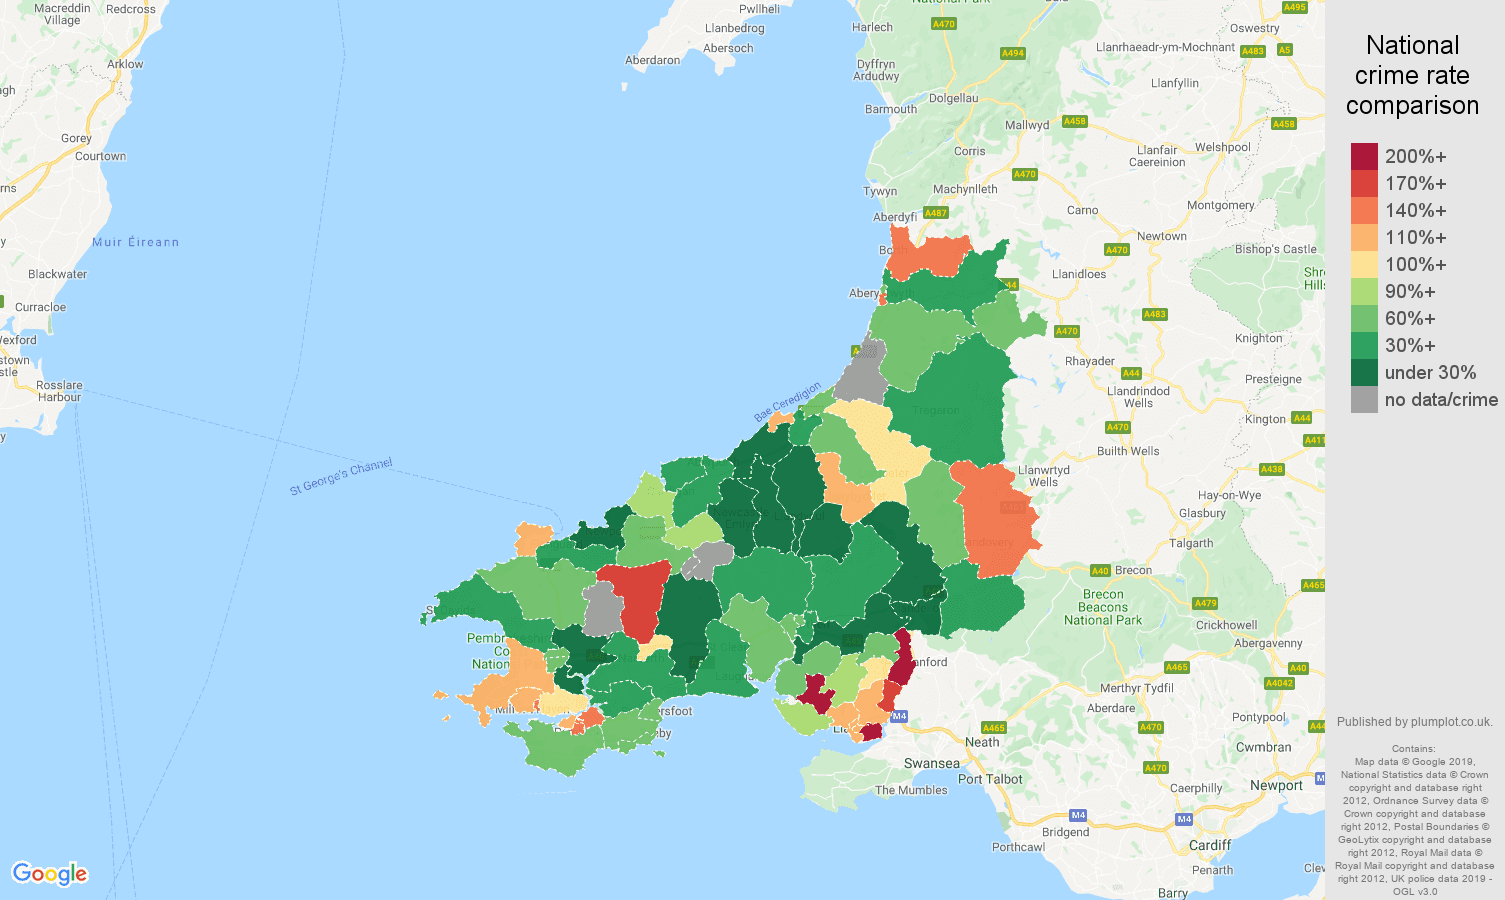 Dyfed other crime rate comparison map